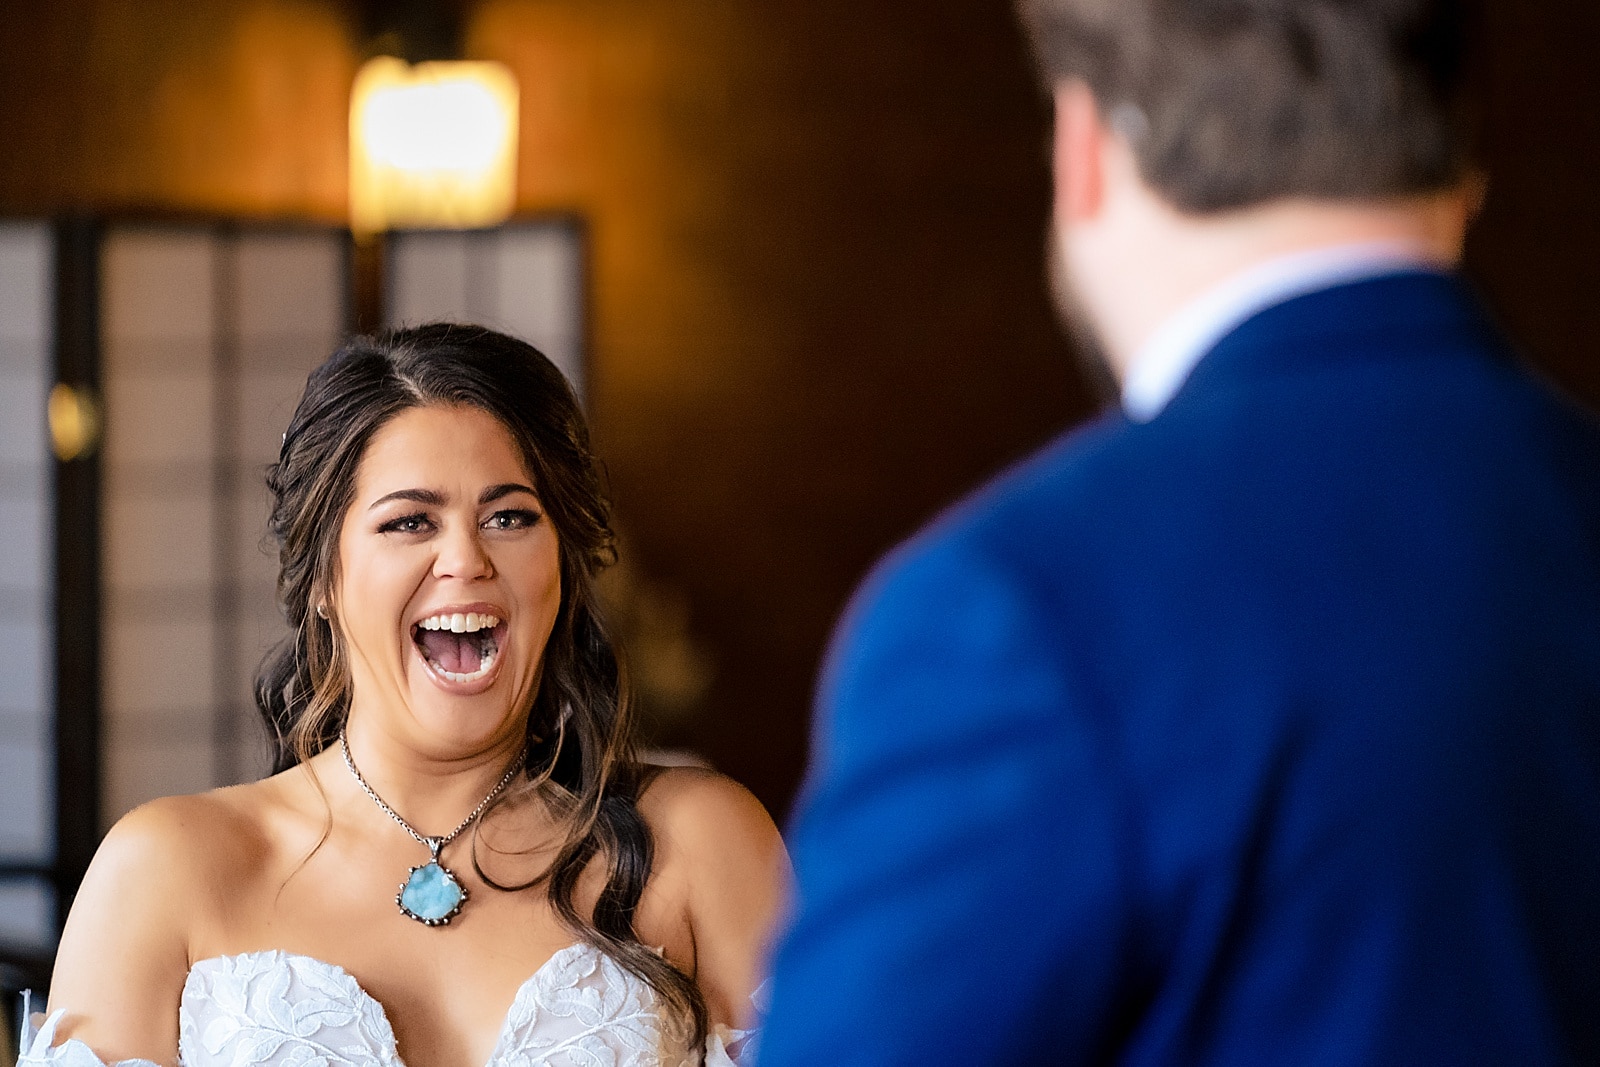 The bride's reaction at this first look is so adorable!